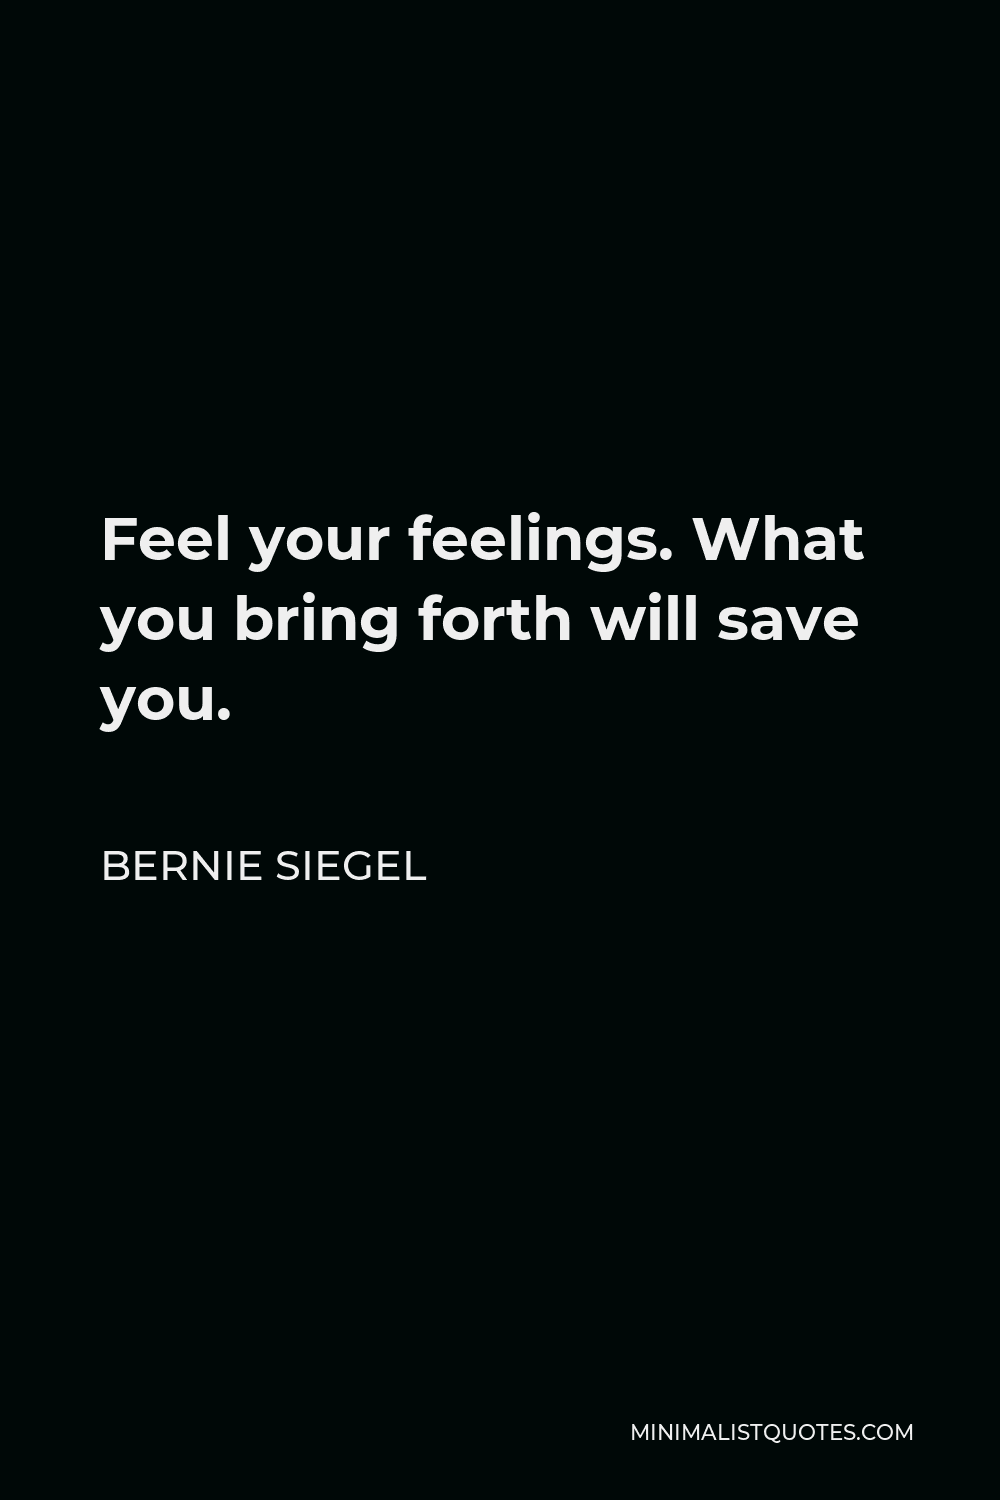 Bernie Siegel Quote - Feel your feelings. What you bring forth will save you.